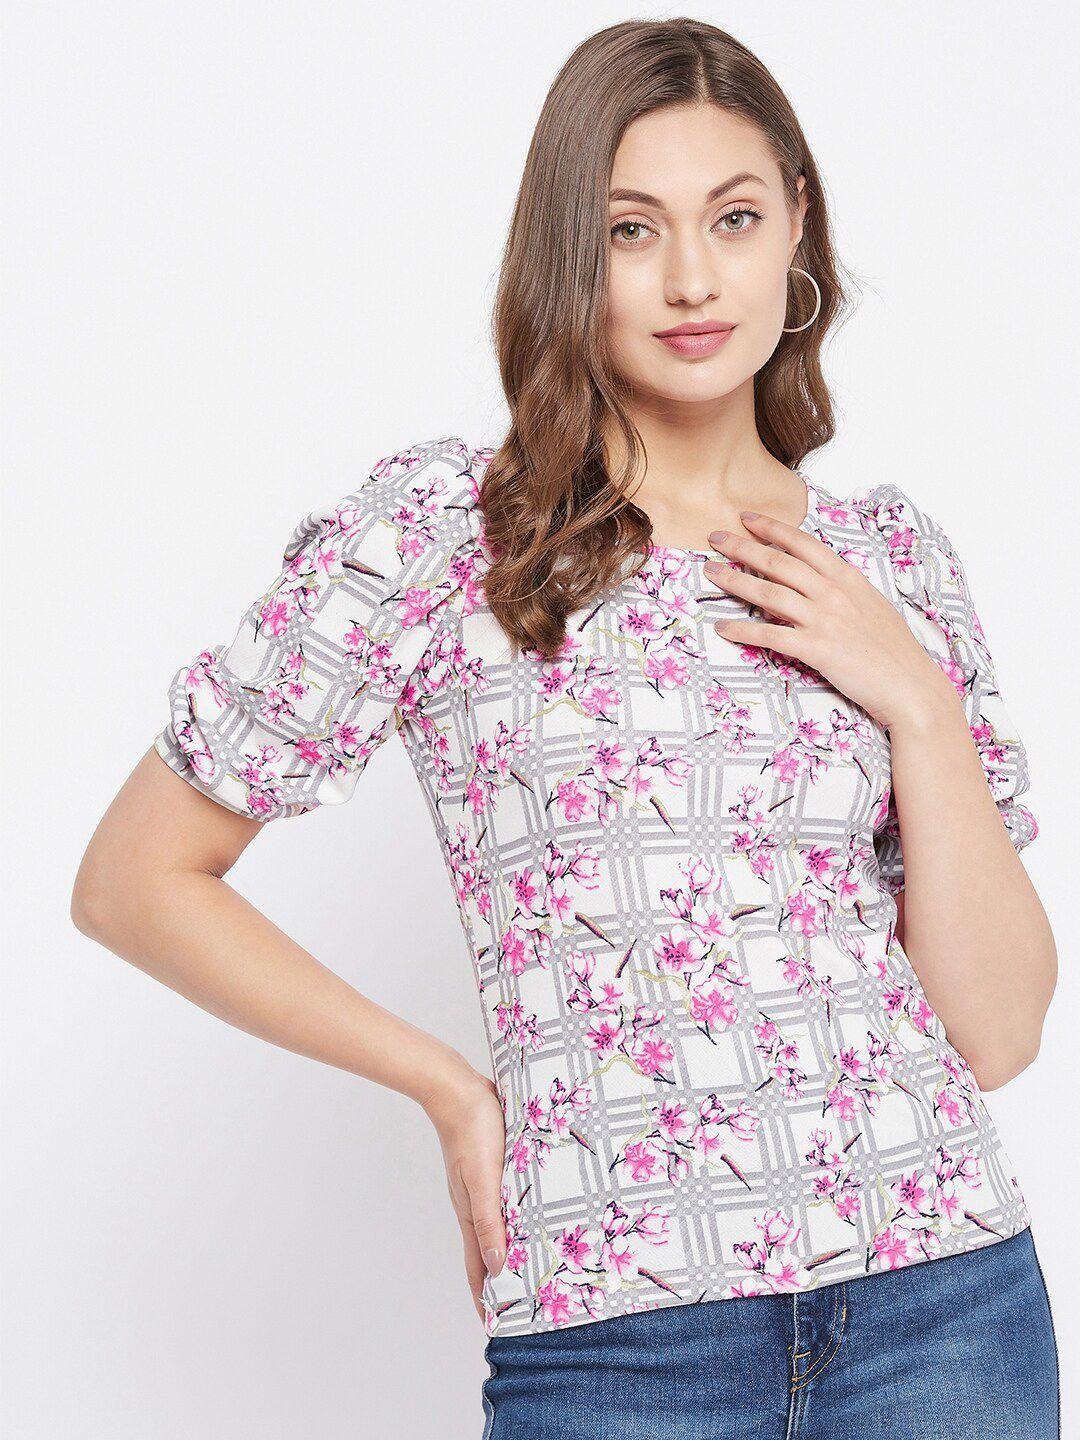 uptownie lite women pink floral print stretchable top